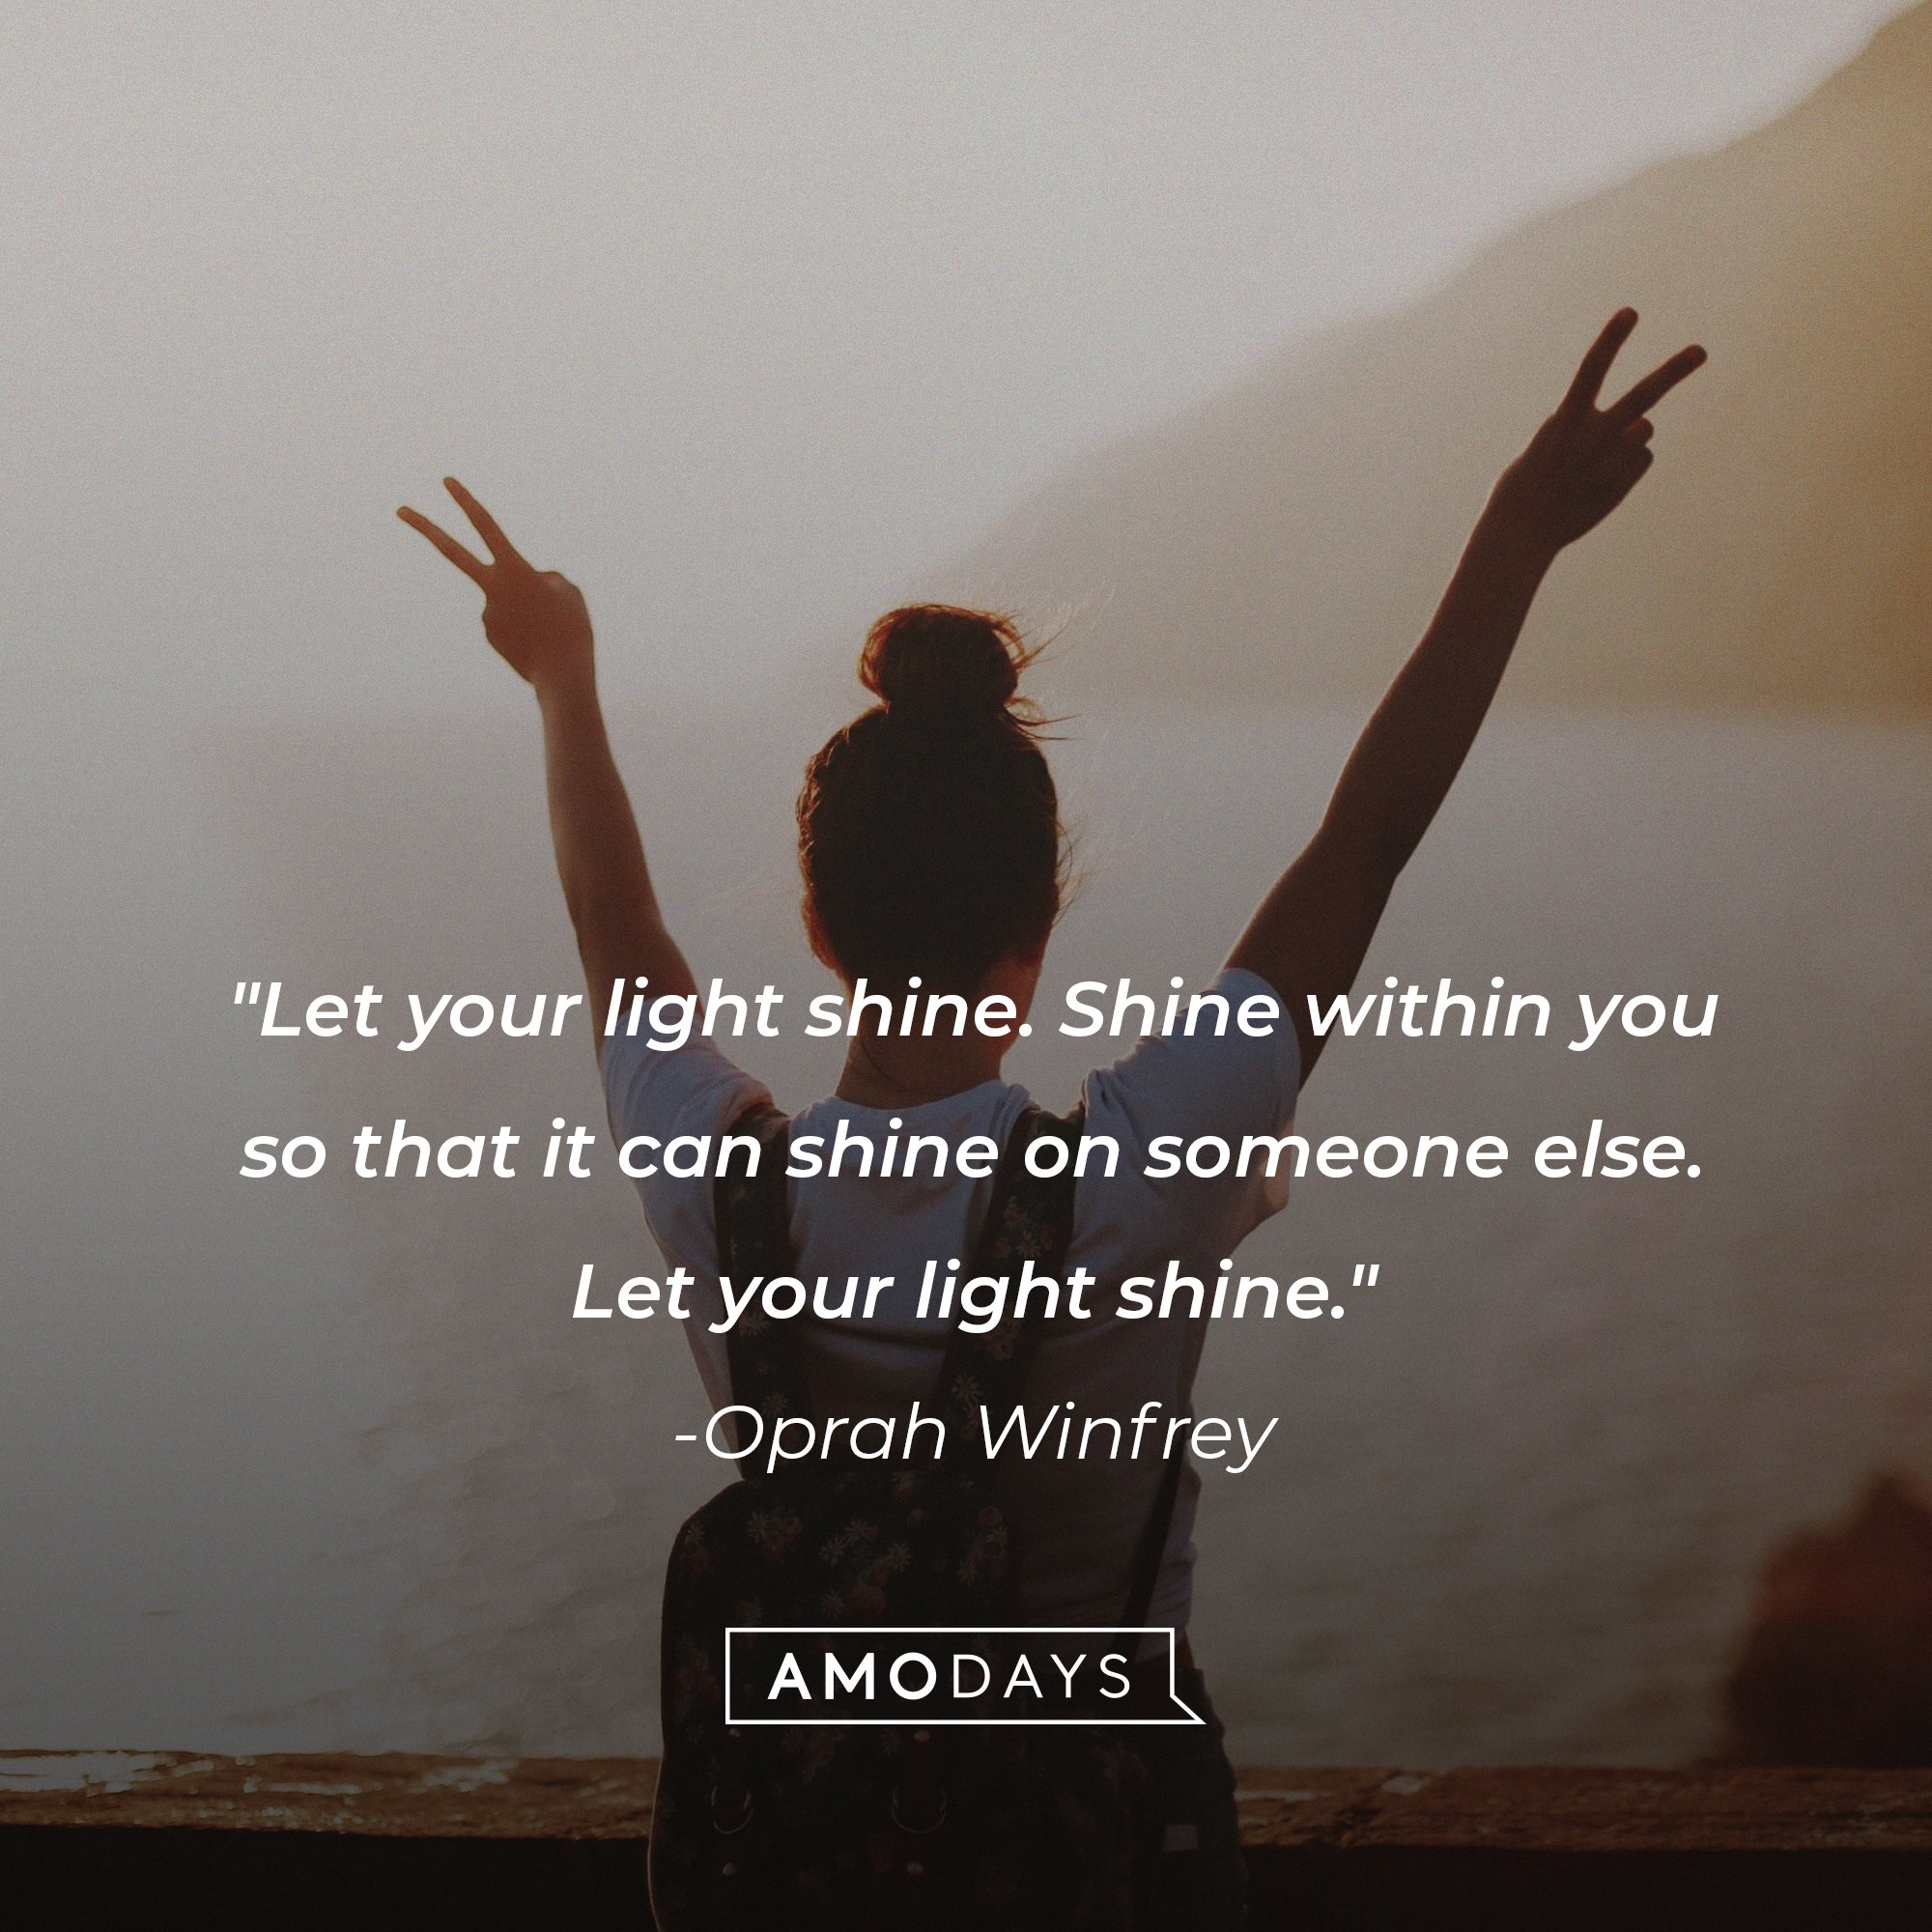 Oprah Winfrey’s quote: "Let your light shine. Shine within you so that it can shine on someone else. Let your light shine." | Image: AmoDays 